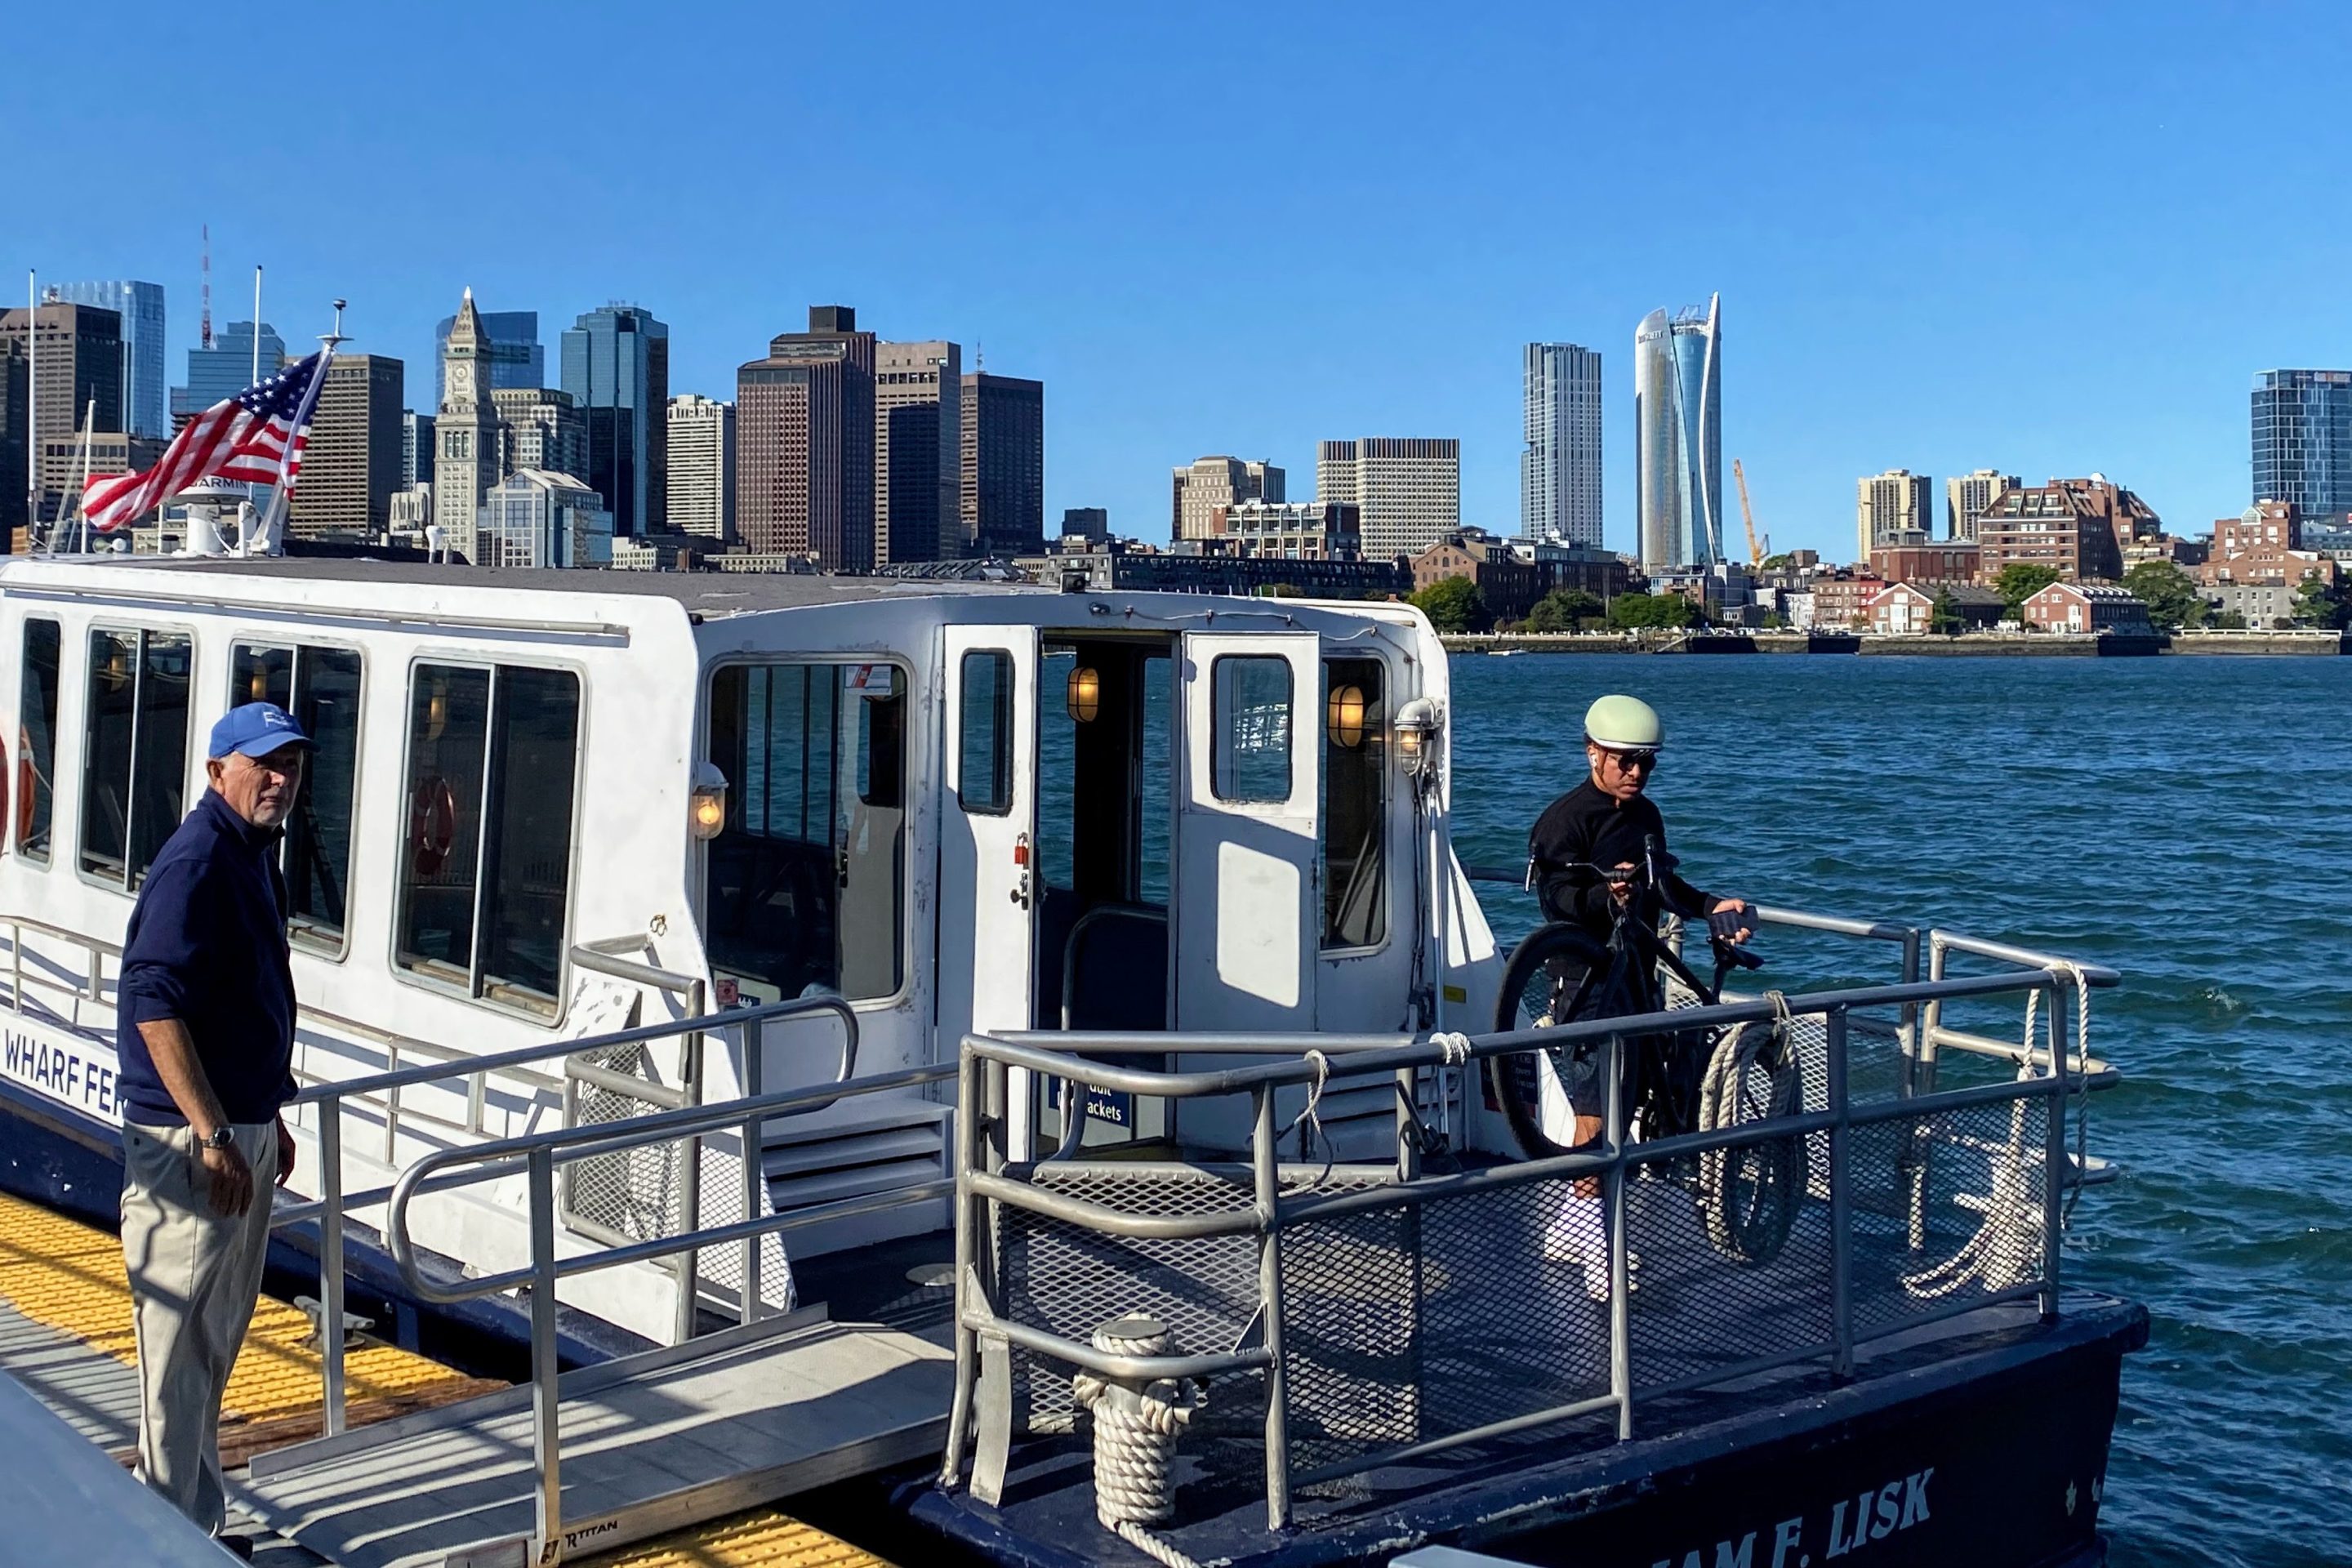 A ferry attendant waits for a bicyclist to wheel his bike onboard at Lewis Wharf in East Boston. The downtown Boston skyline is visible in the background beyond Boston Harbor.